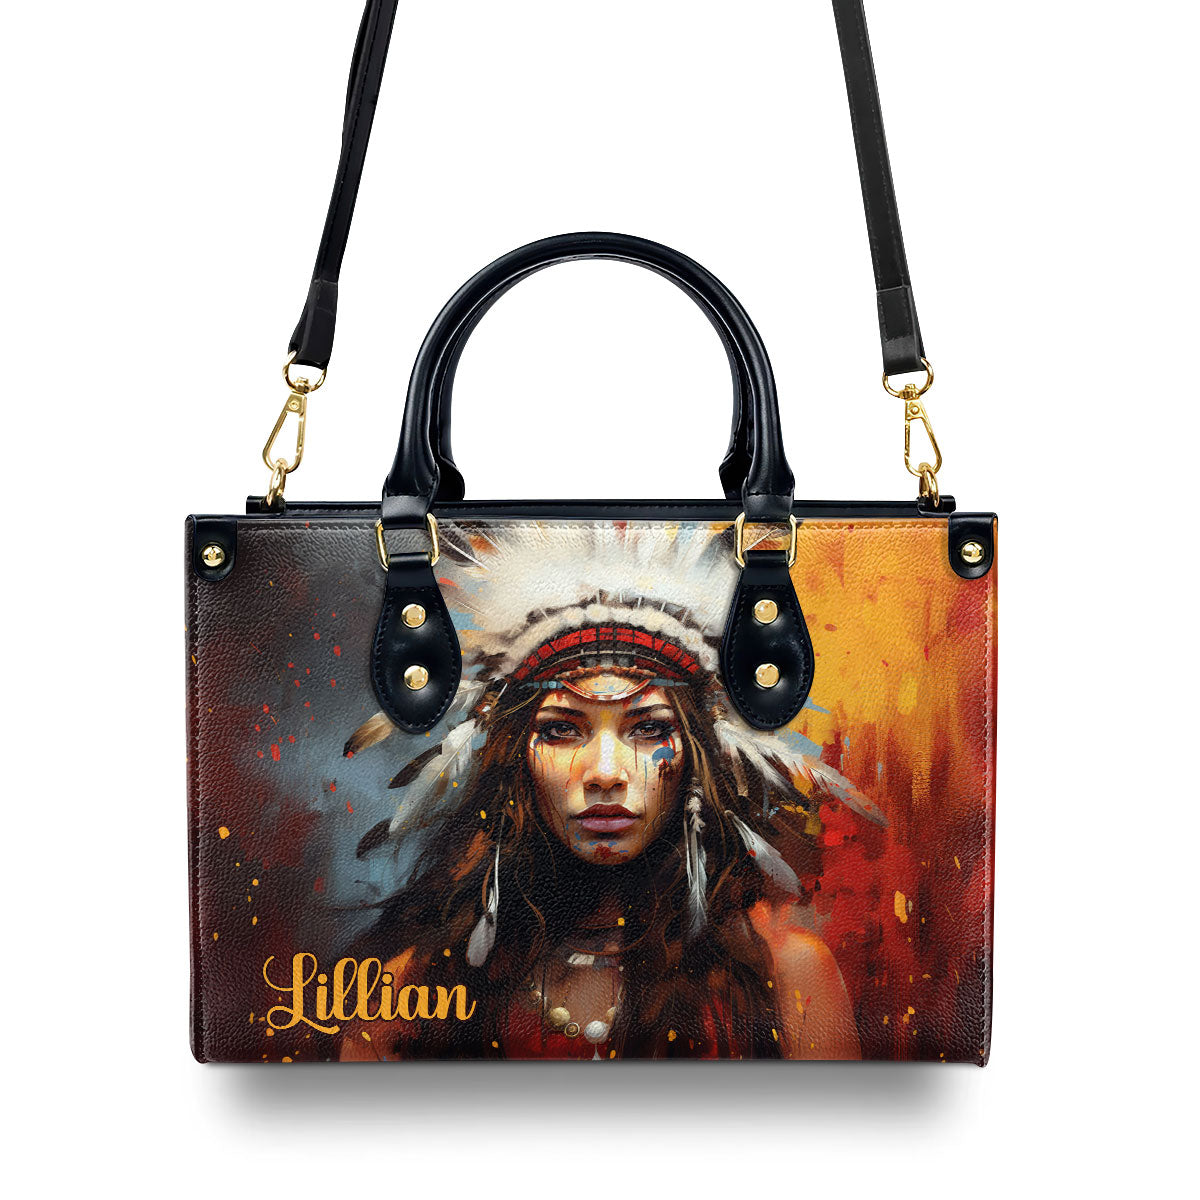 Native American Girl - Personalized Leather Handbag MS111